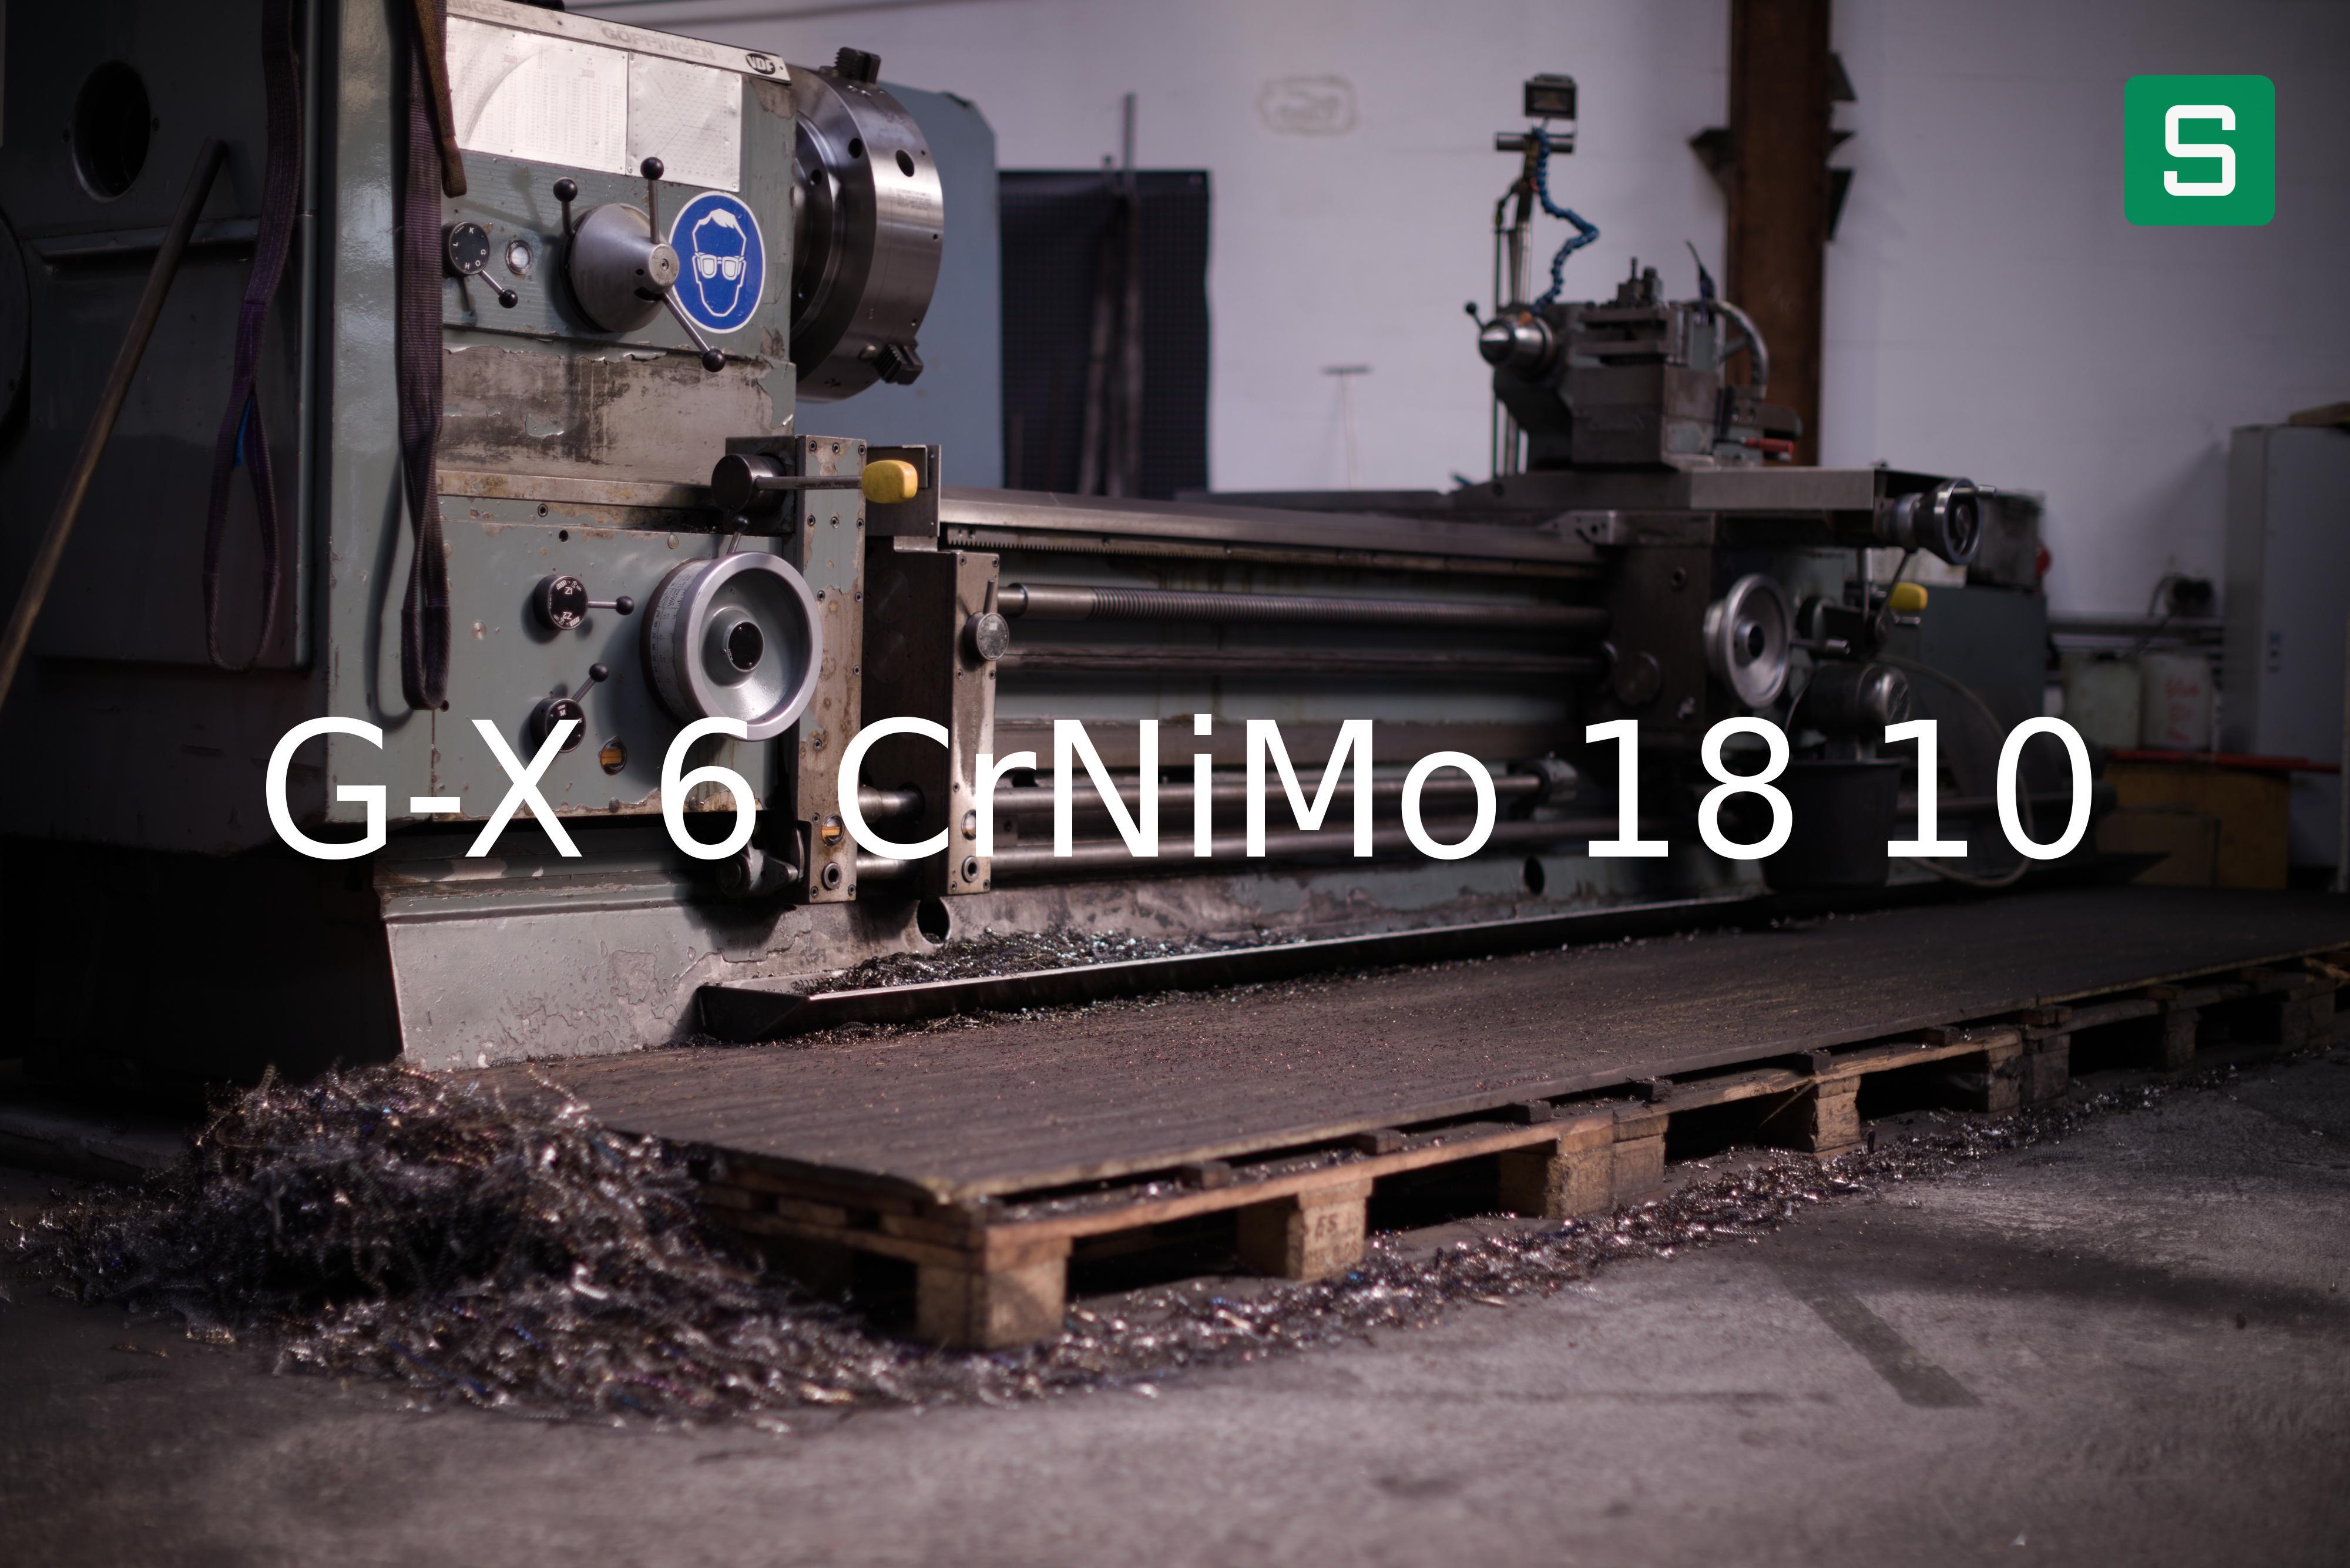 Steel Material: G-X 6 CrNiMo 18 10